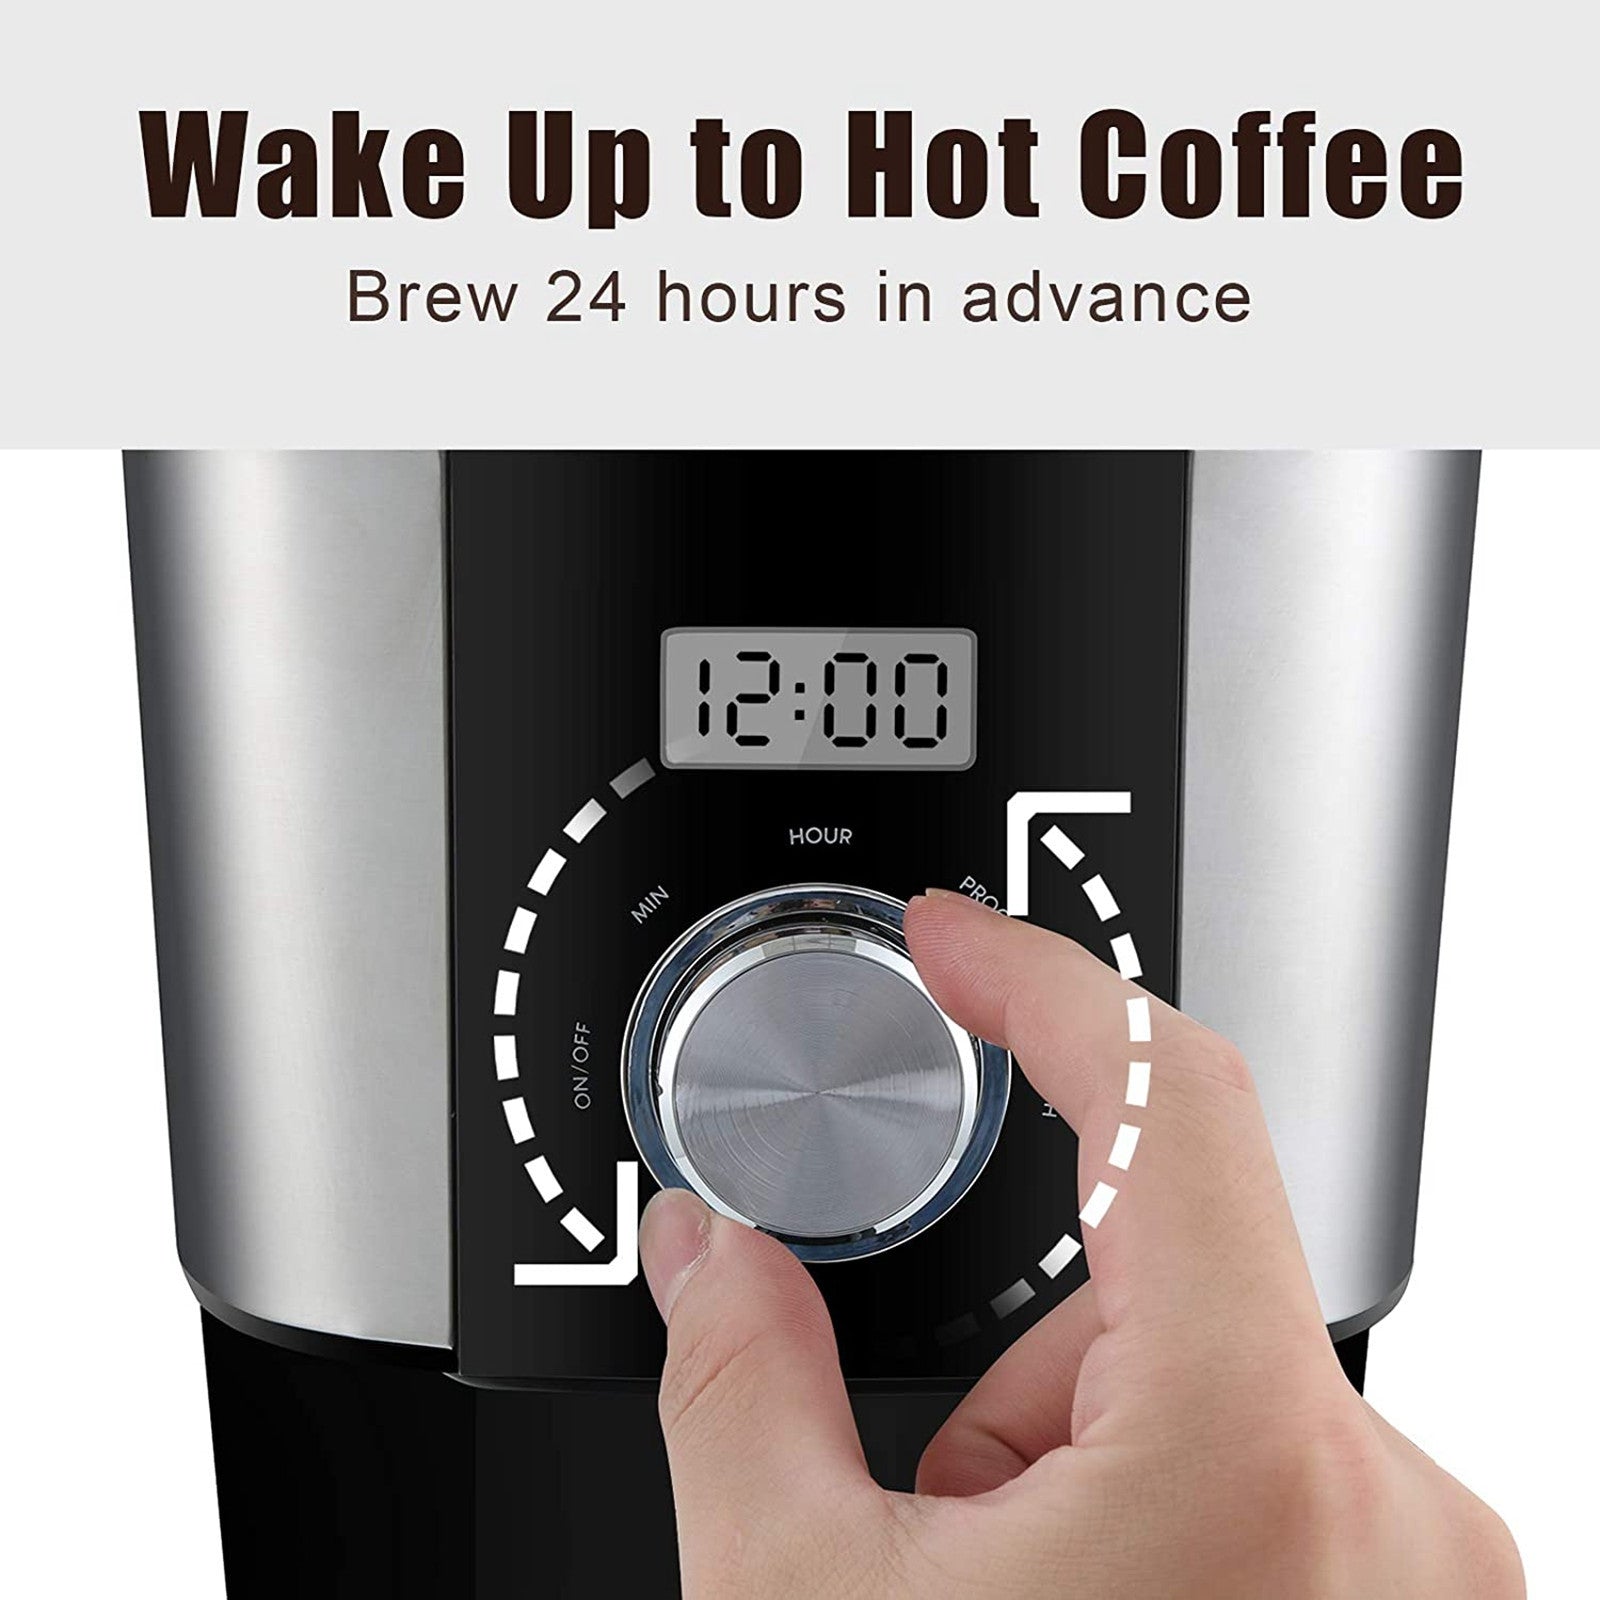 12 Cup Stainless Steel Programmable Coffee Maker, Black